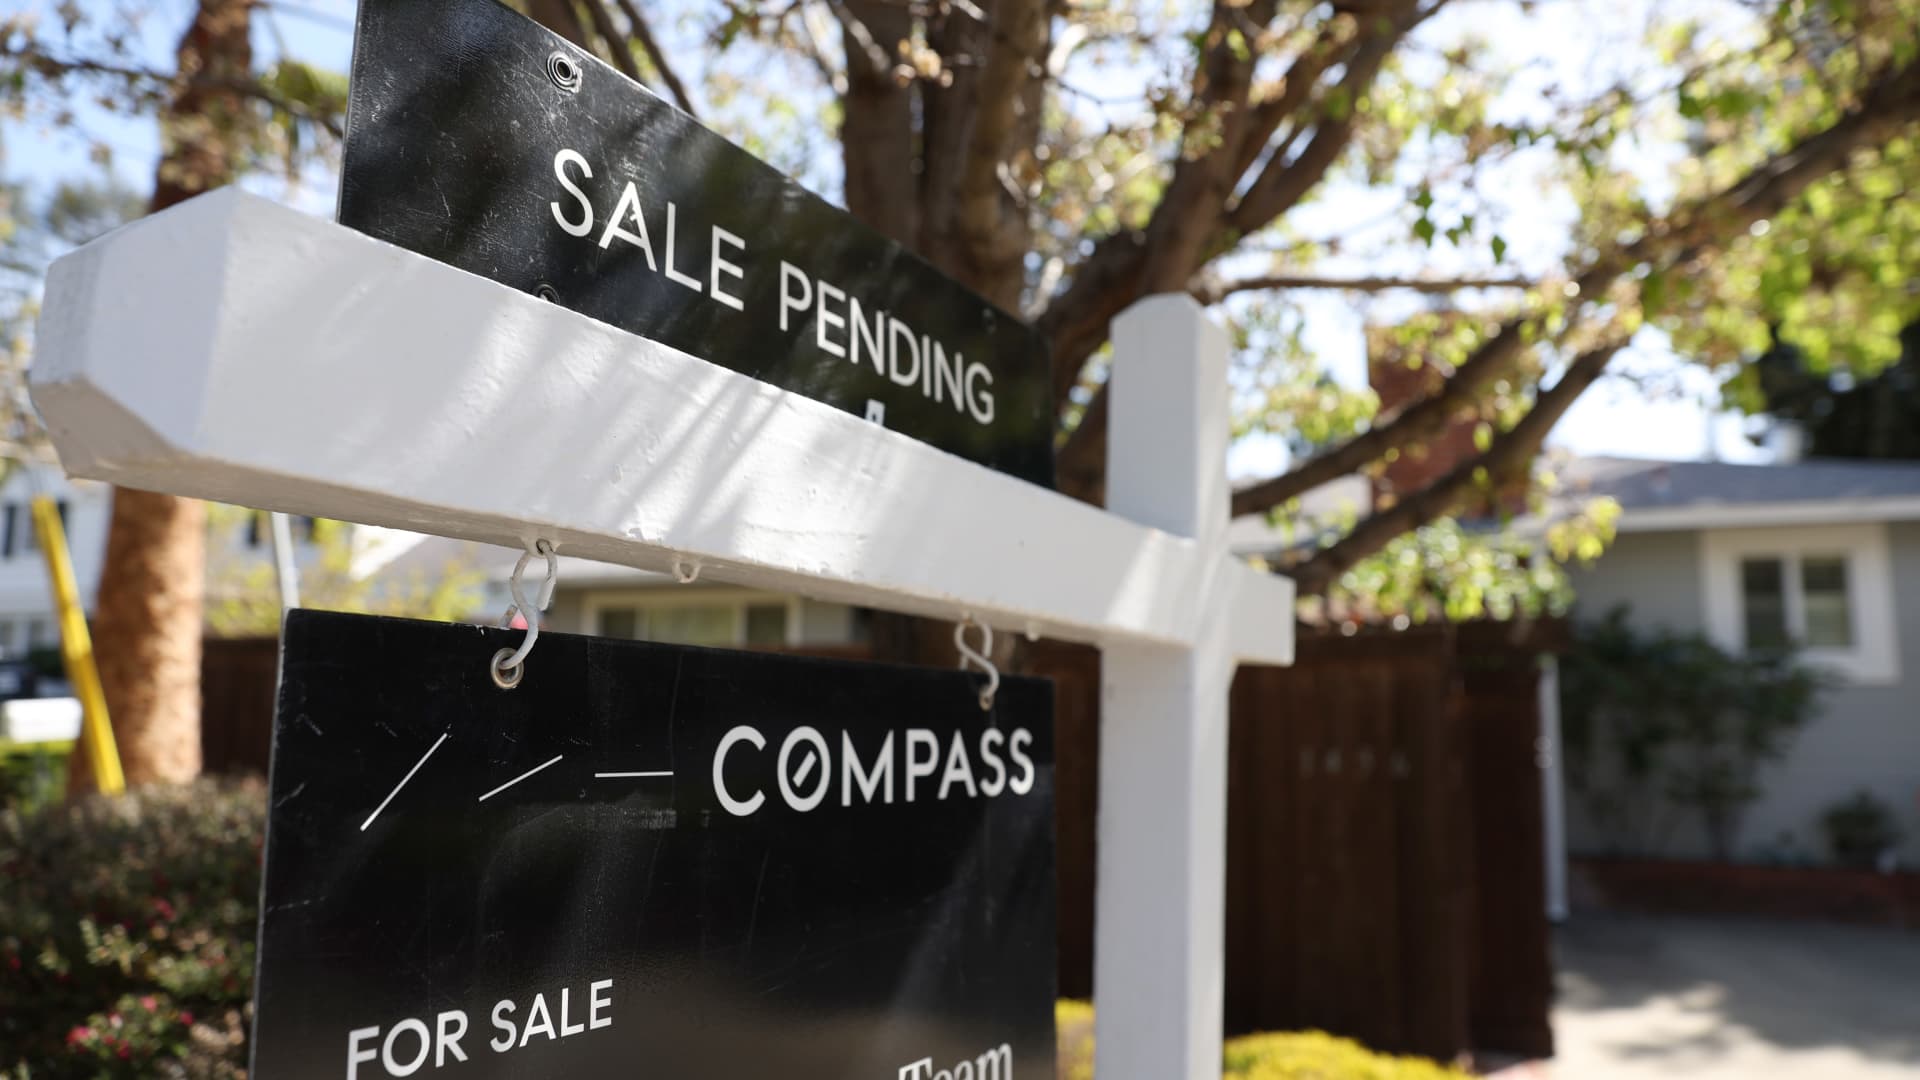 Adjustable-rate mortgage demand doubles as interest rates hit the highest since 2009